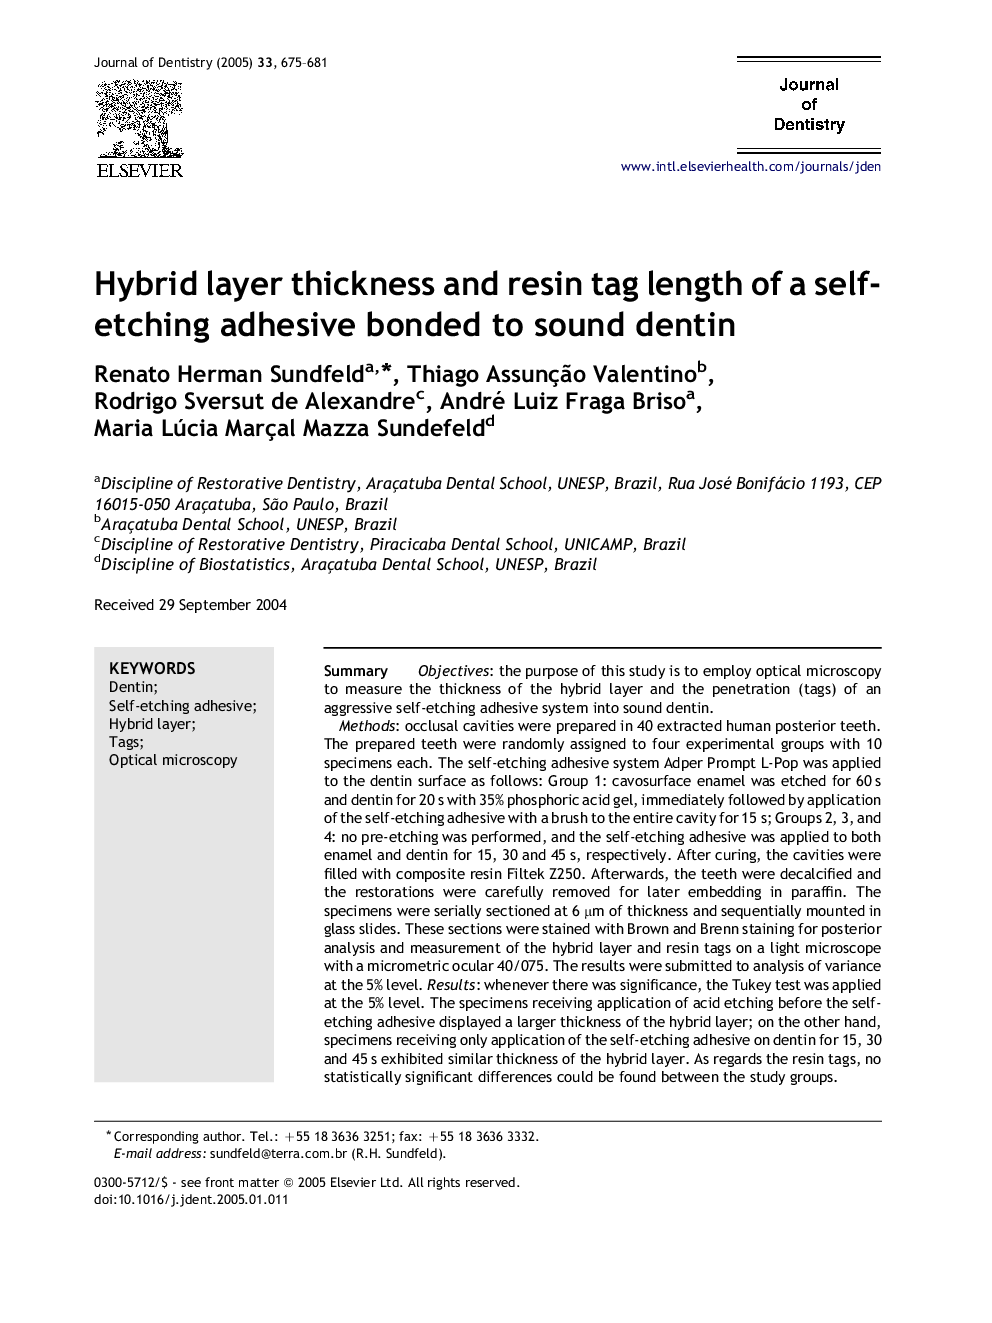 Hybrid layer thickness and resin tag length of a self-etching adhesive bonded to sound dentin